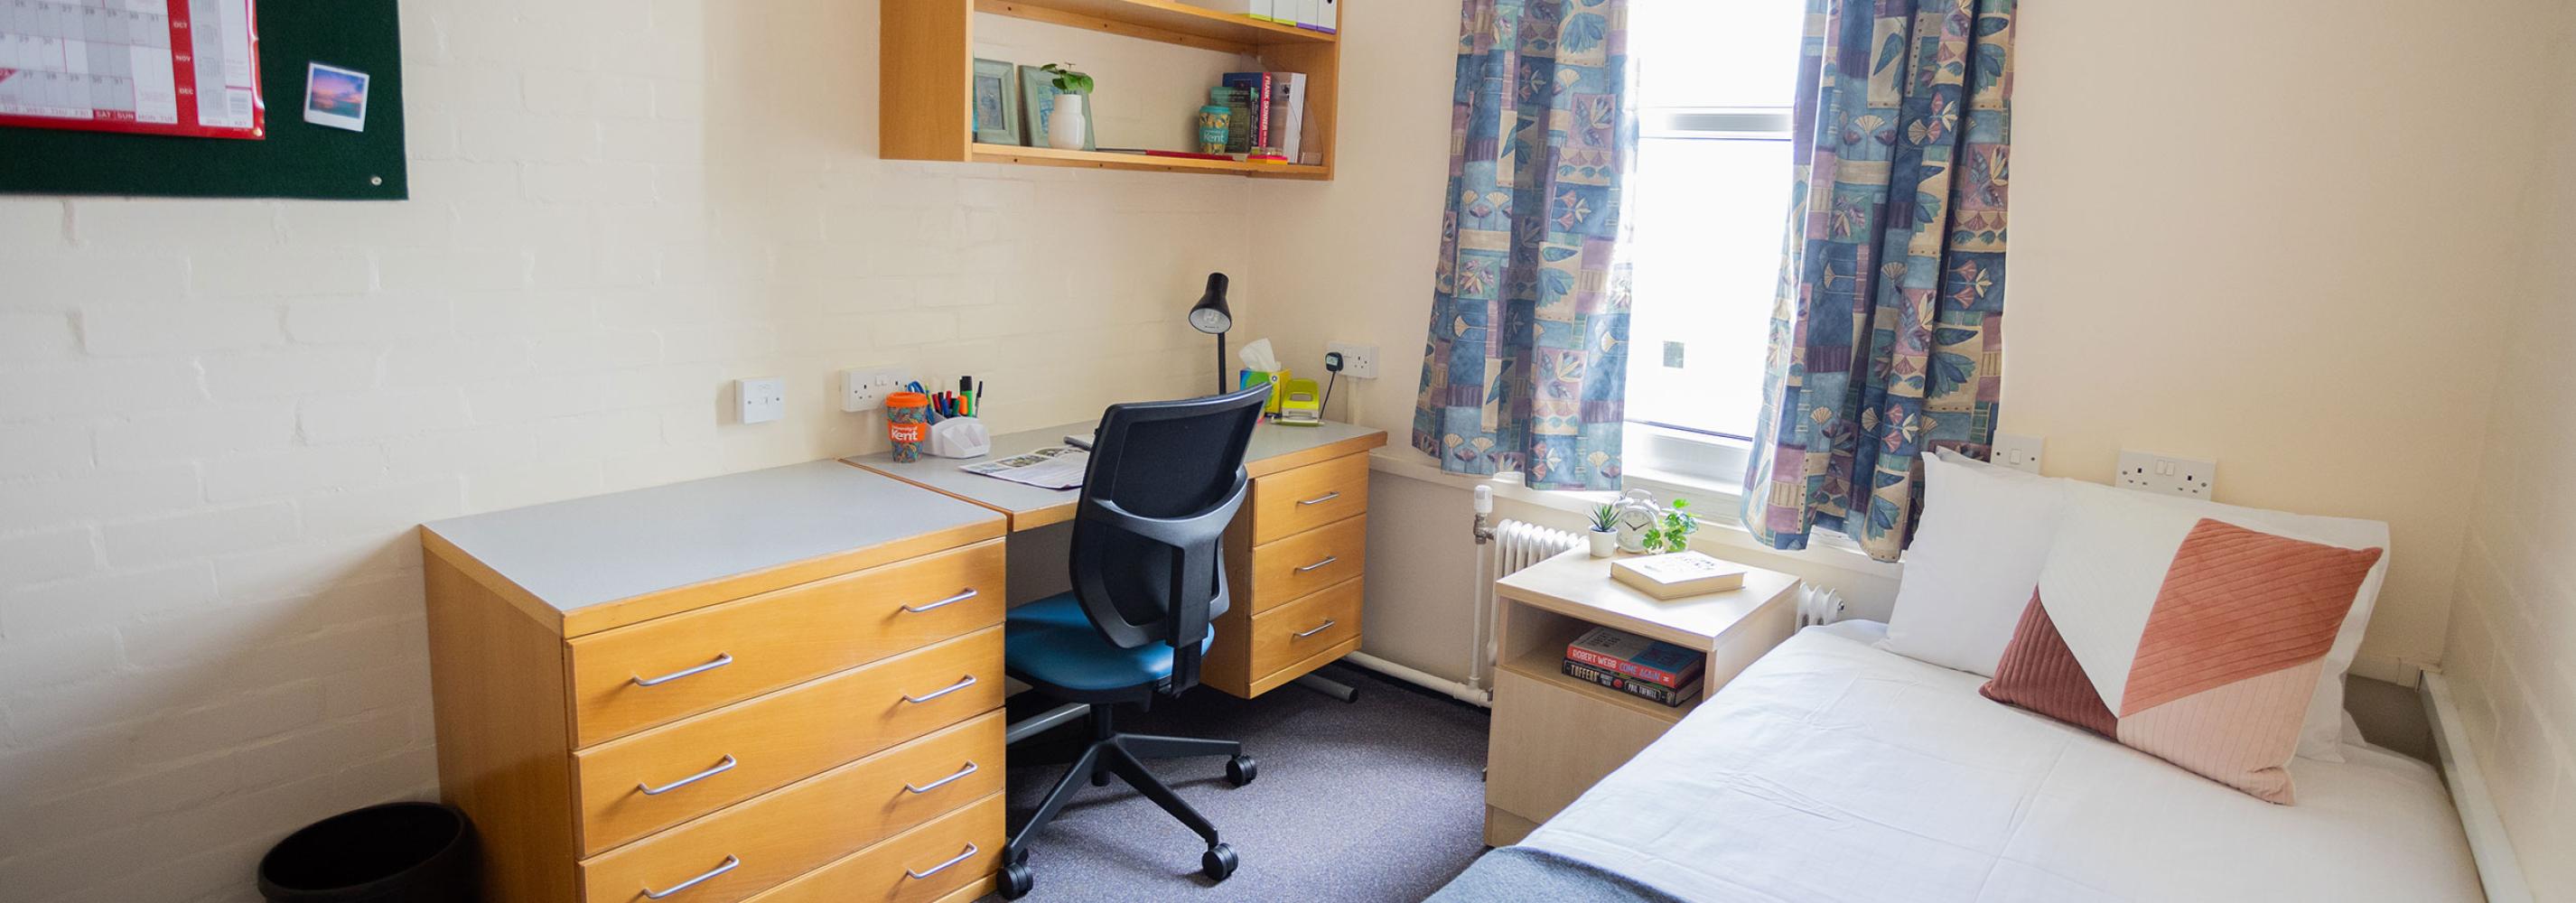 Rutherford College standard room 